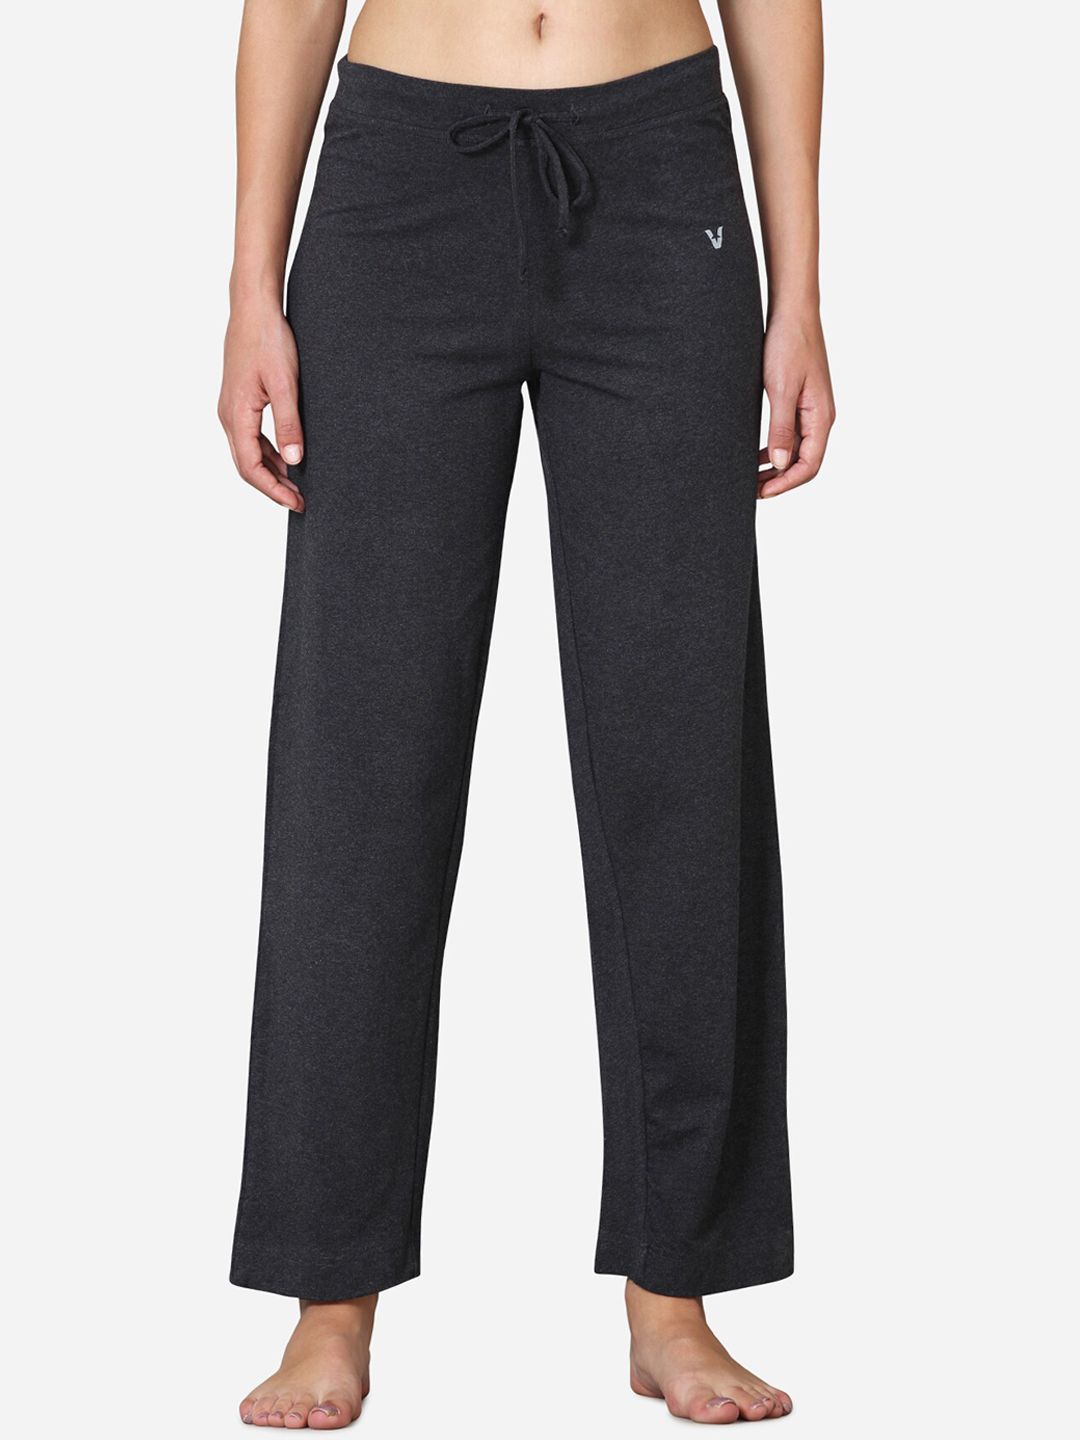 VStar Women Charcoal Solid Lounge Pants Price in India